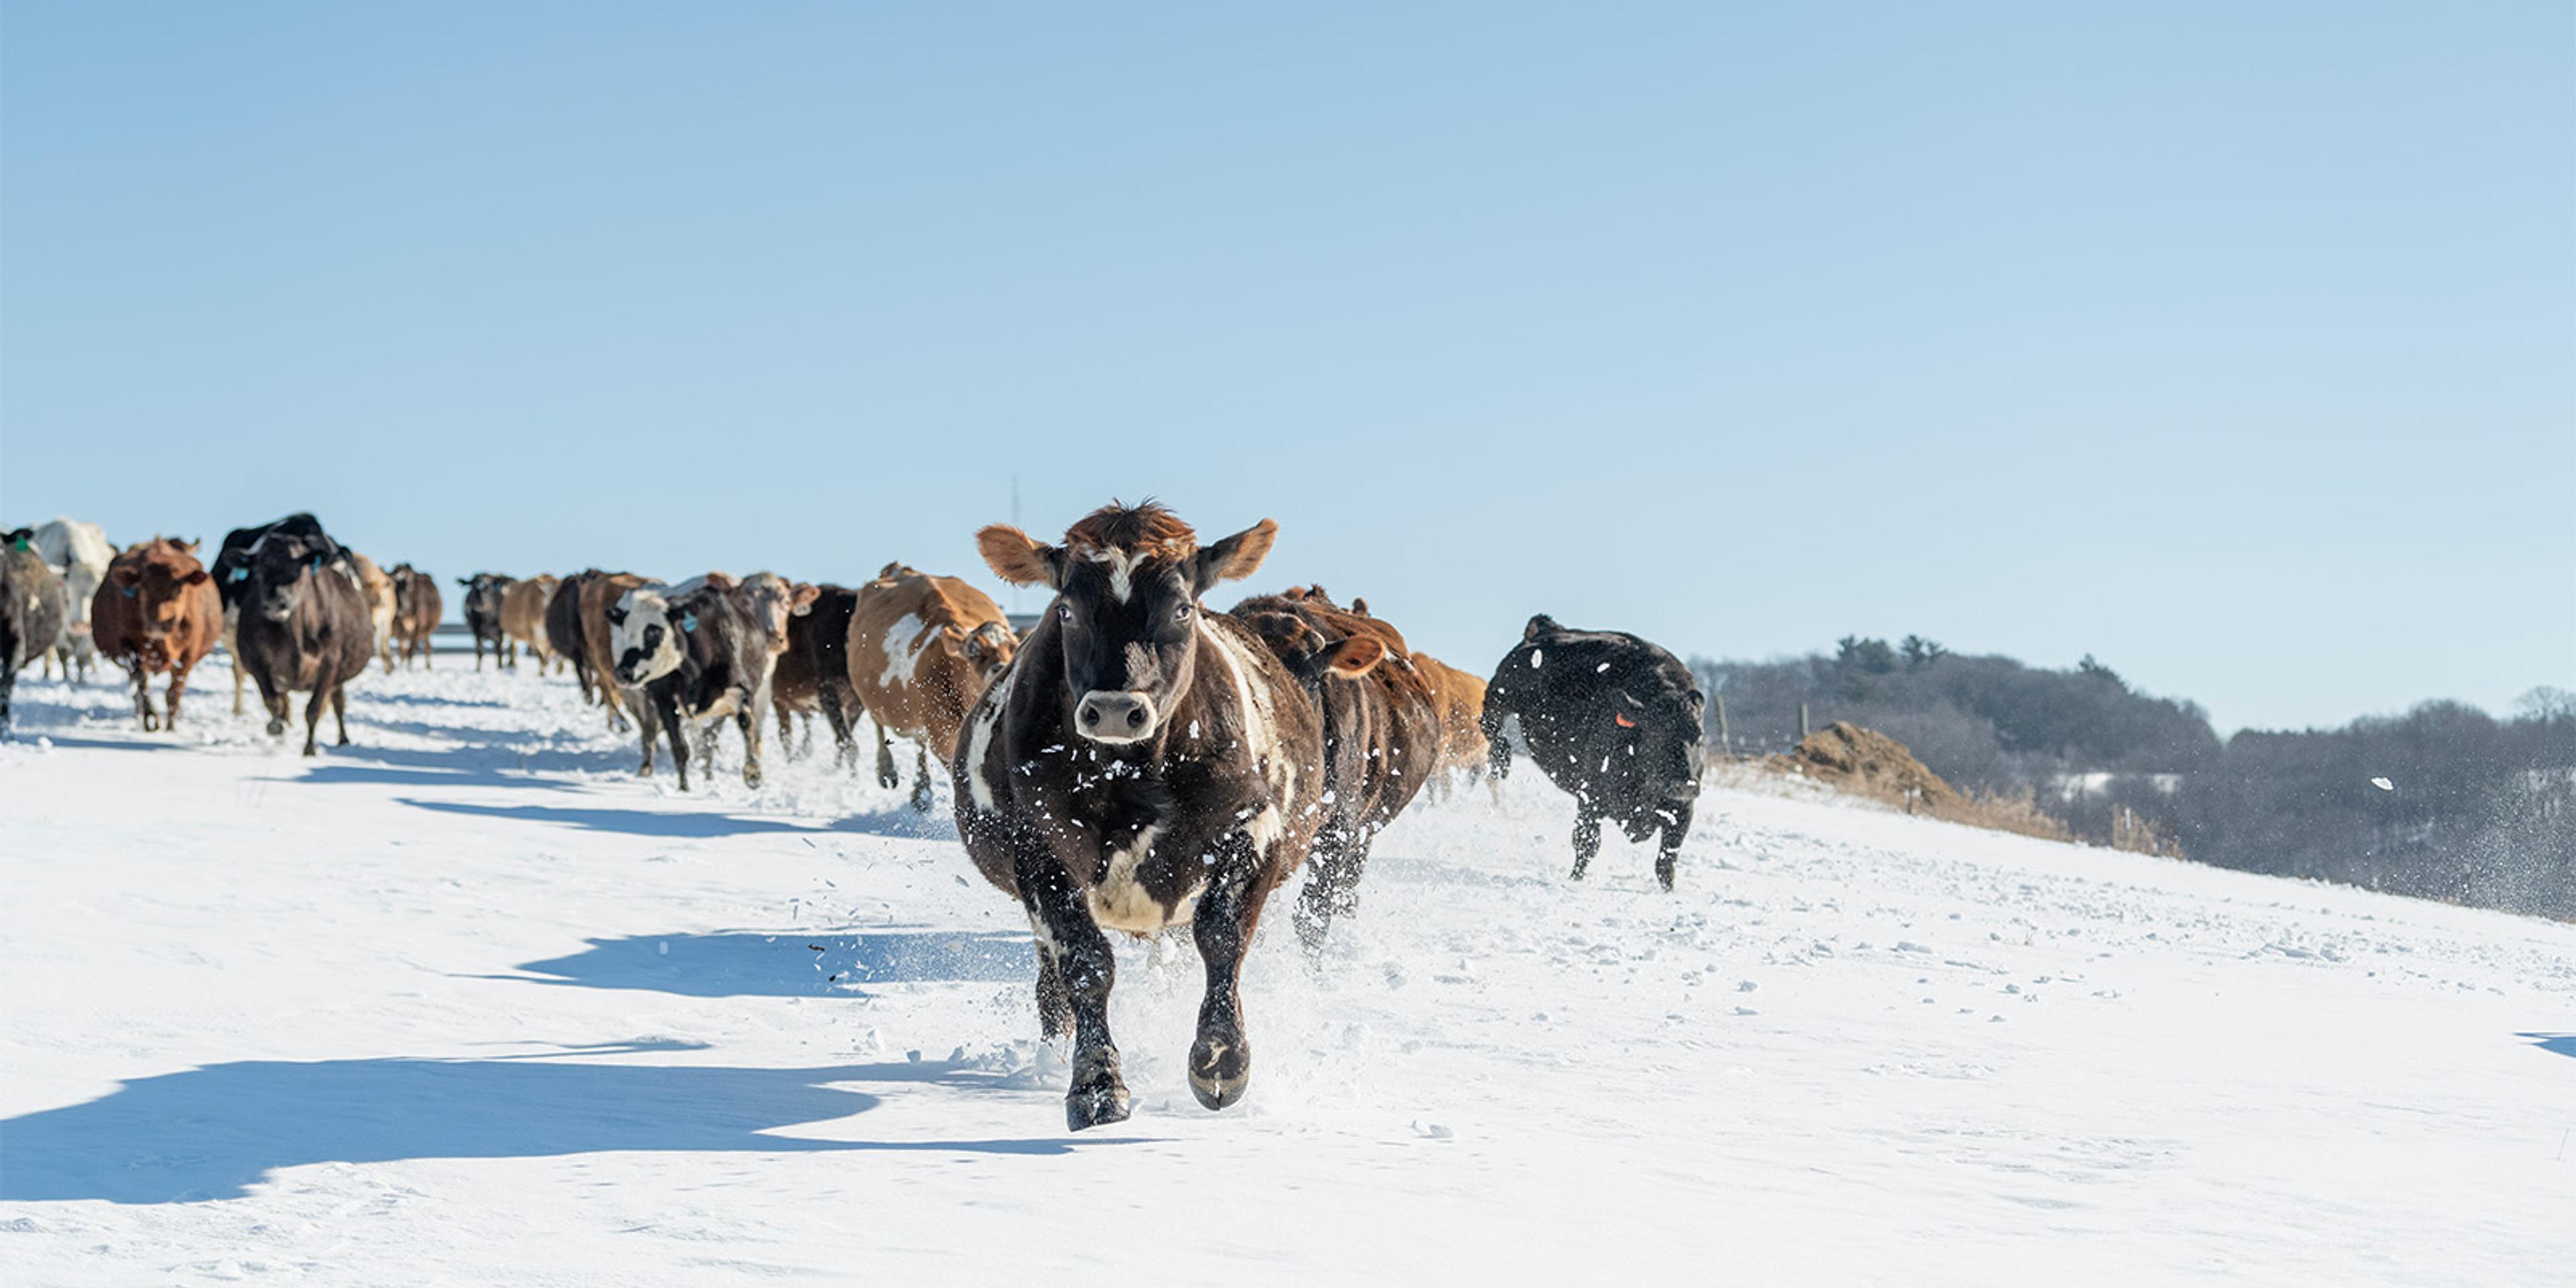 Cows jump around and run in the snow.